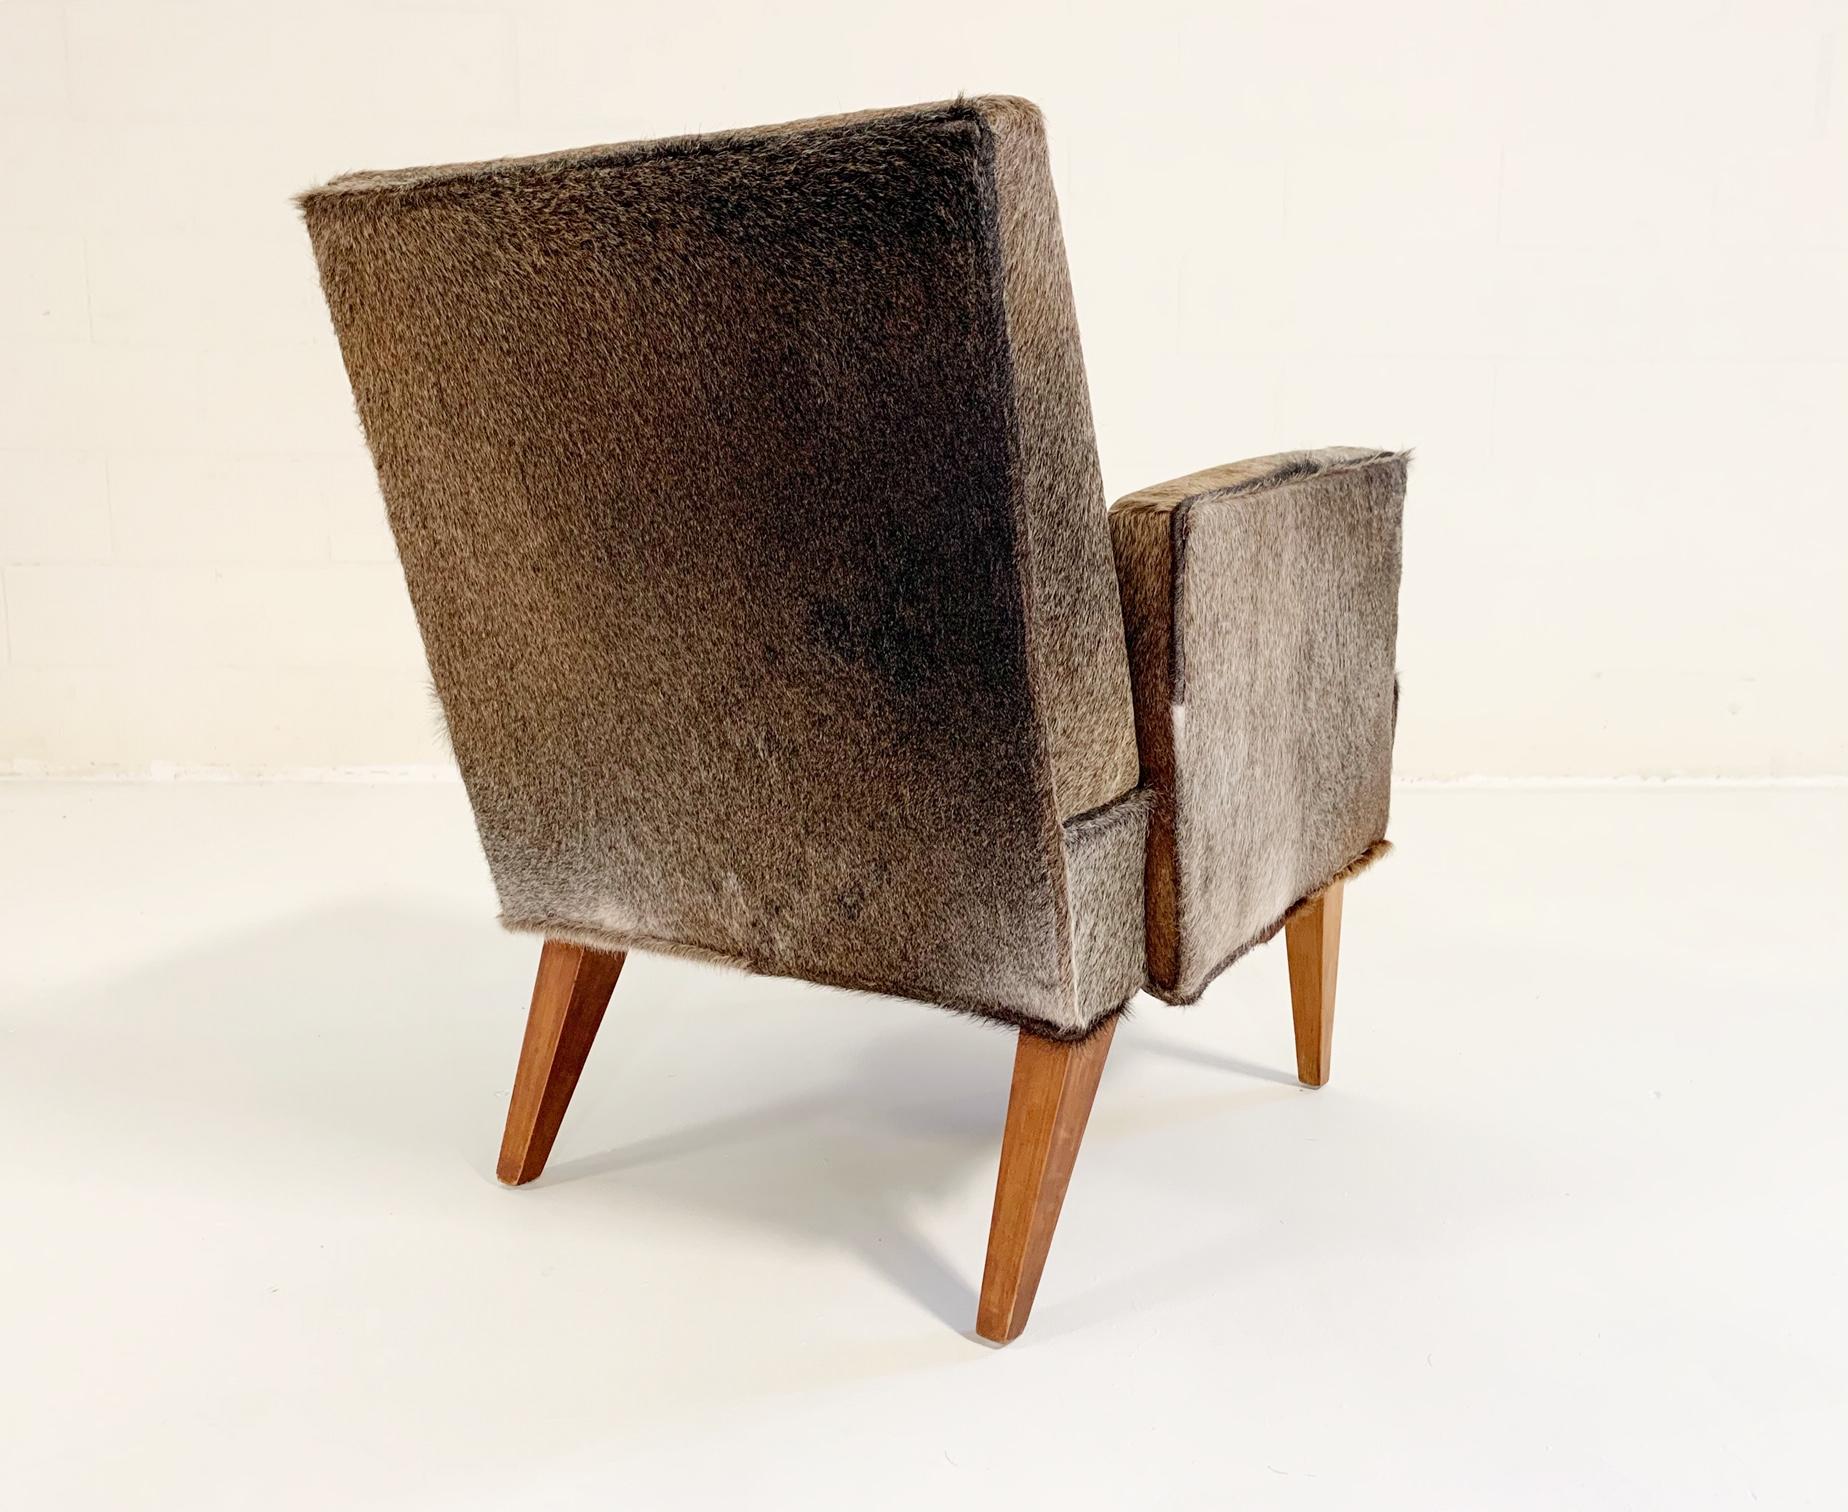 We completely restored the chair down to the frame and upholstered in our popular salt and pepper Brazilian cowhide. This is a perfect side chair for a den or bedroom.